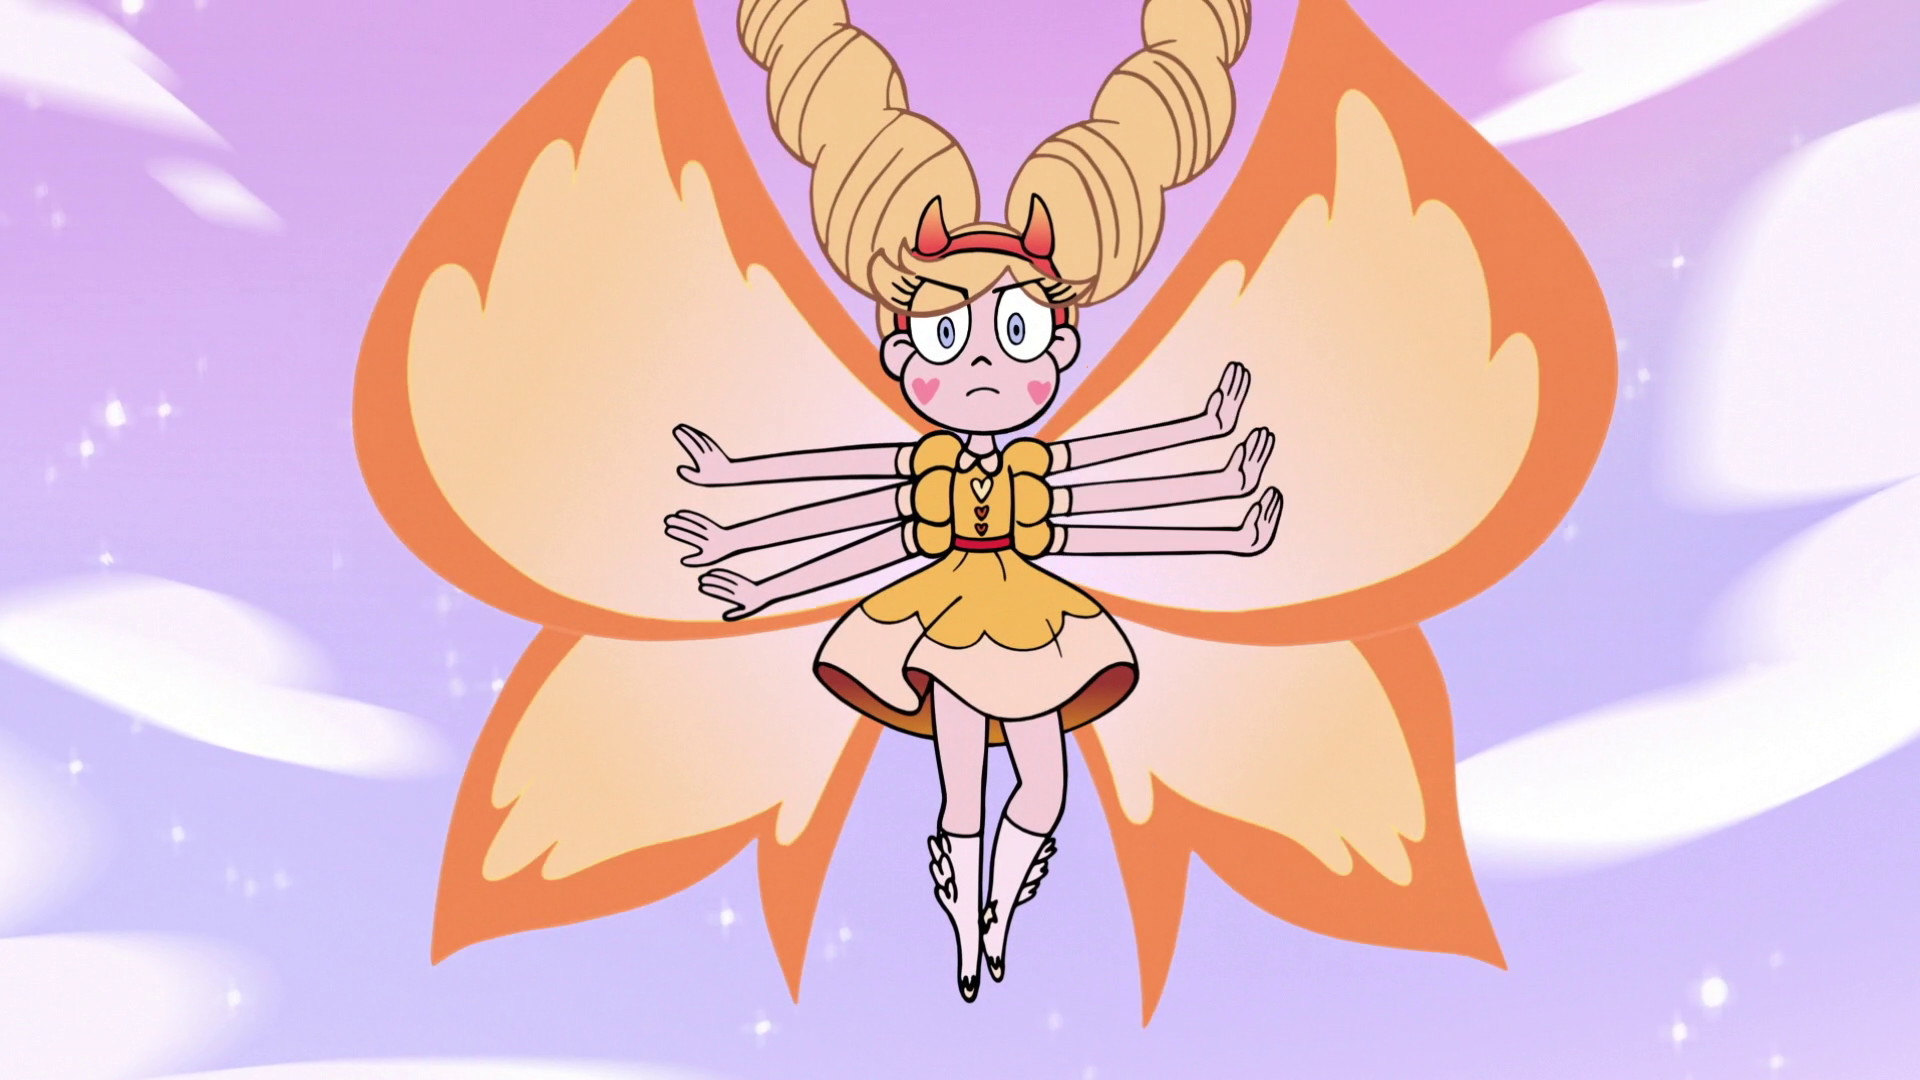 image-s3e37-star-in-her-mewberty-form-png-star-vs-the-forces-of